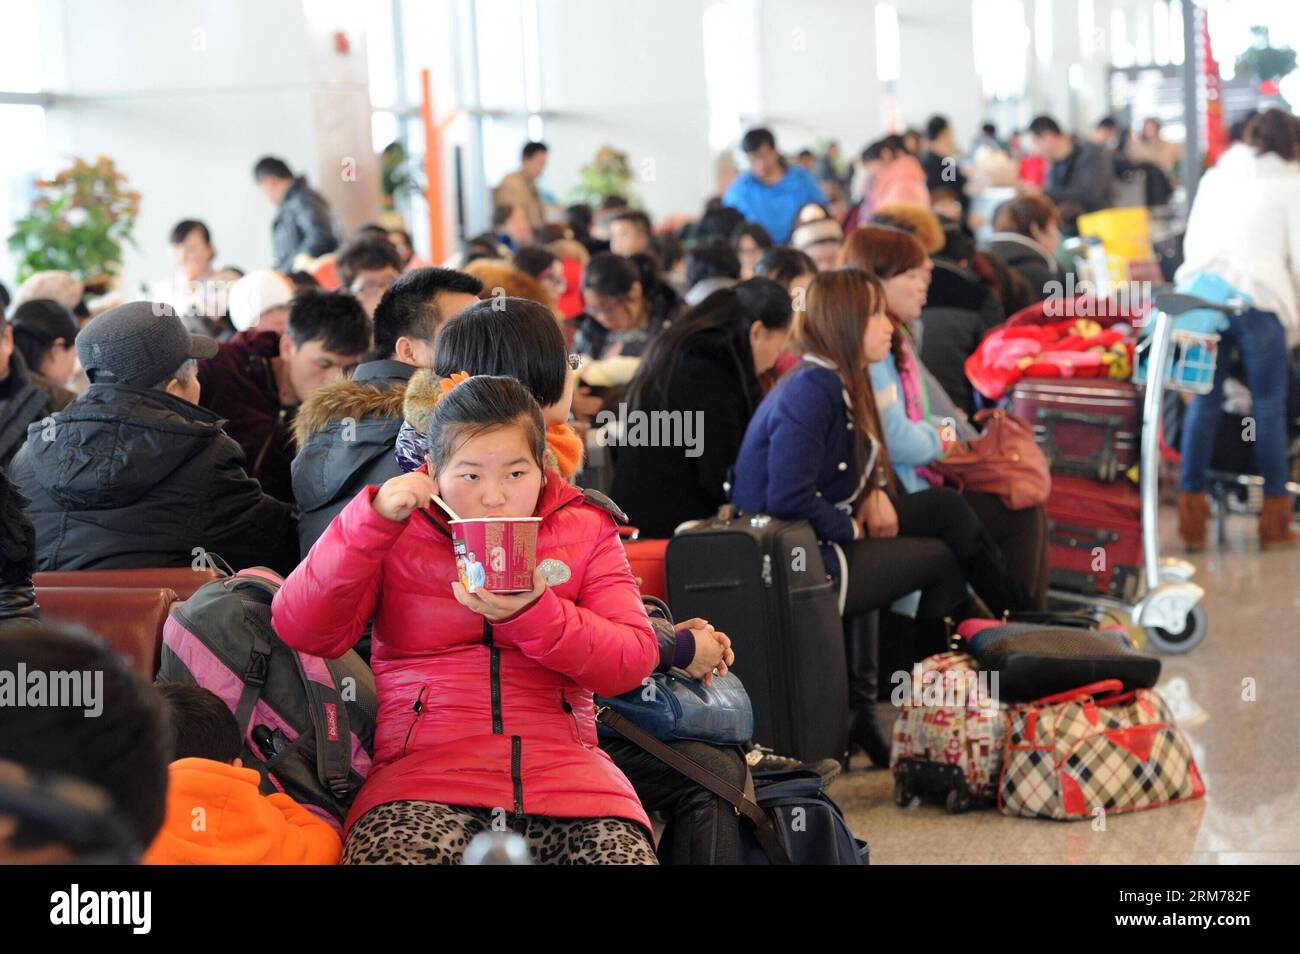 (140218) -- GUIYANG, Feb. 18, 2014 (Xinhua) -- A girl eats instant noodles when stranded at Longdongbao International Airport in Guiyang, capital of southwest China s Guizhou Province, Feb. 18, 2013. Heavy snow led to temporary closure of the airport at 8 a.m. Tuesday for snow and ice removal. More than 90 flights were canceled and over 4,800 passengers were affected before the airport was reopened at noon. (Xinhua/Tao Liang)(wjq) CHINA-GUIZHOU-SNOW-AIRPORT CLOSURE (CN) PUBLICATIONxNOTxINxCHN   Guiyang Feb 18 2014 XINHUA a Girl eats Instant Noodles When stranded AT Longdongbao International Ai Stock Photo